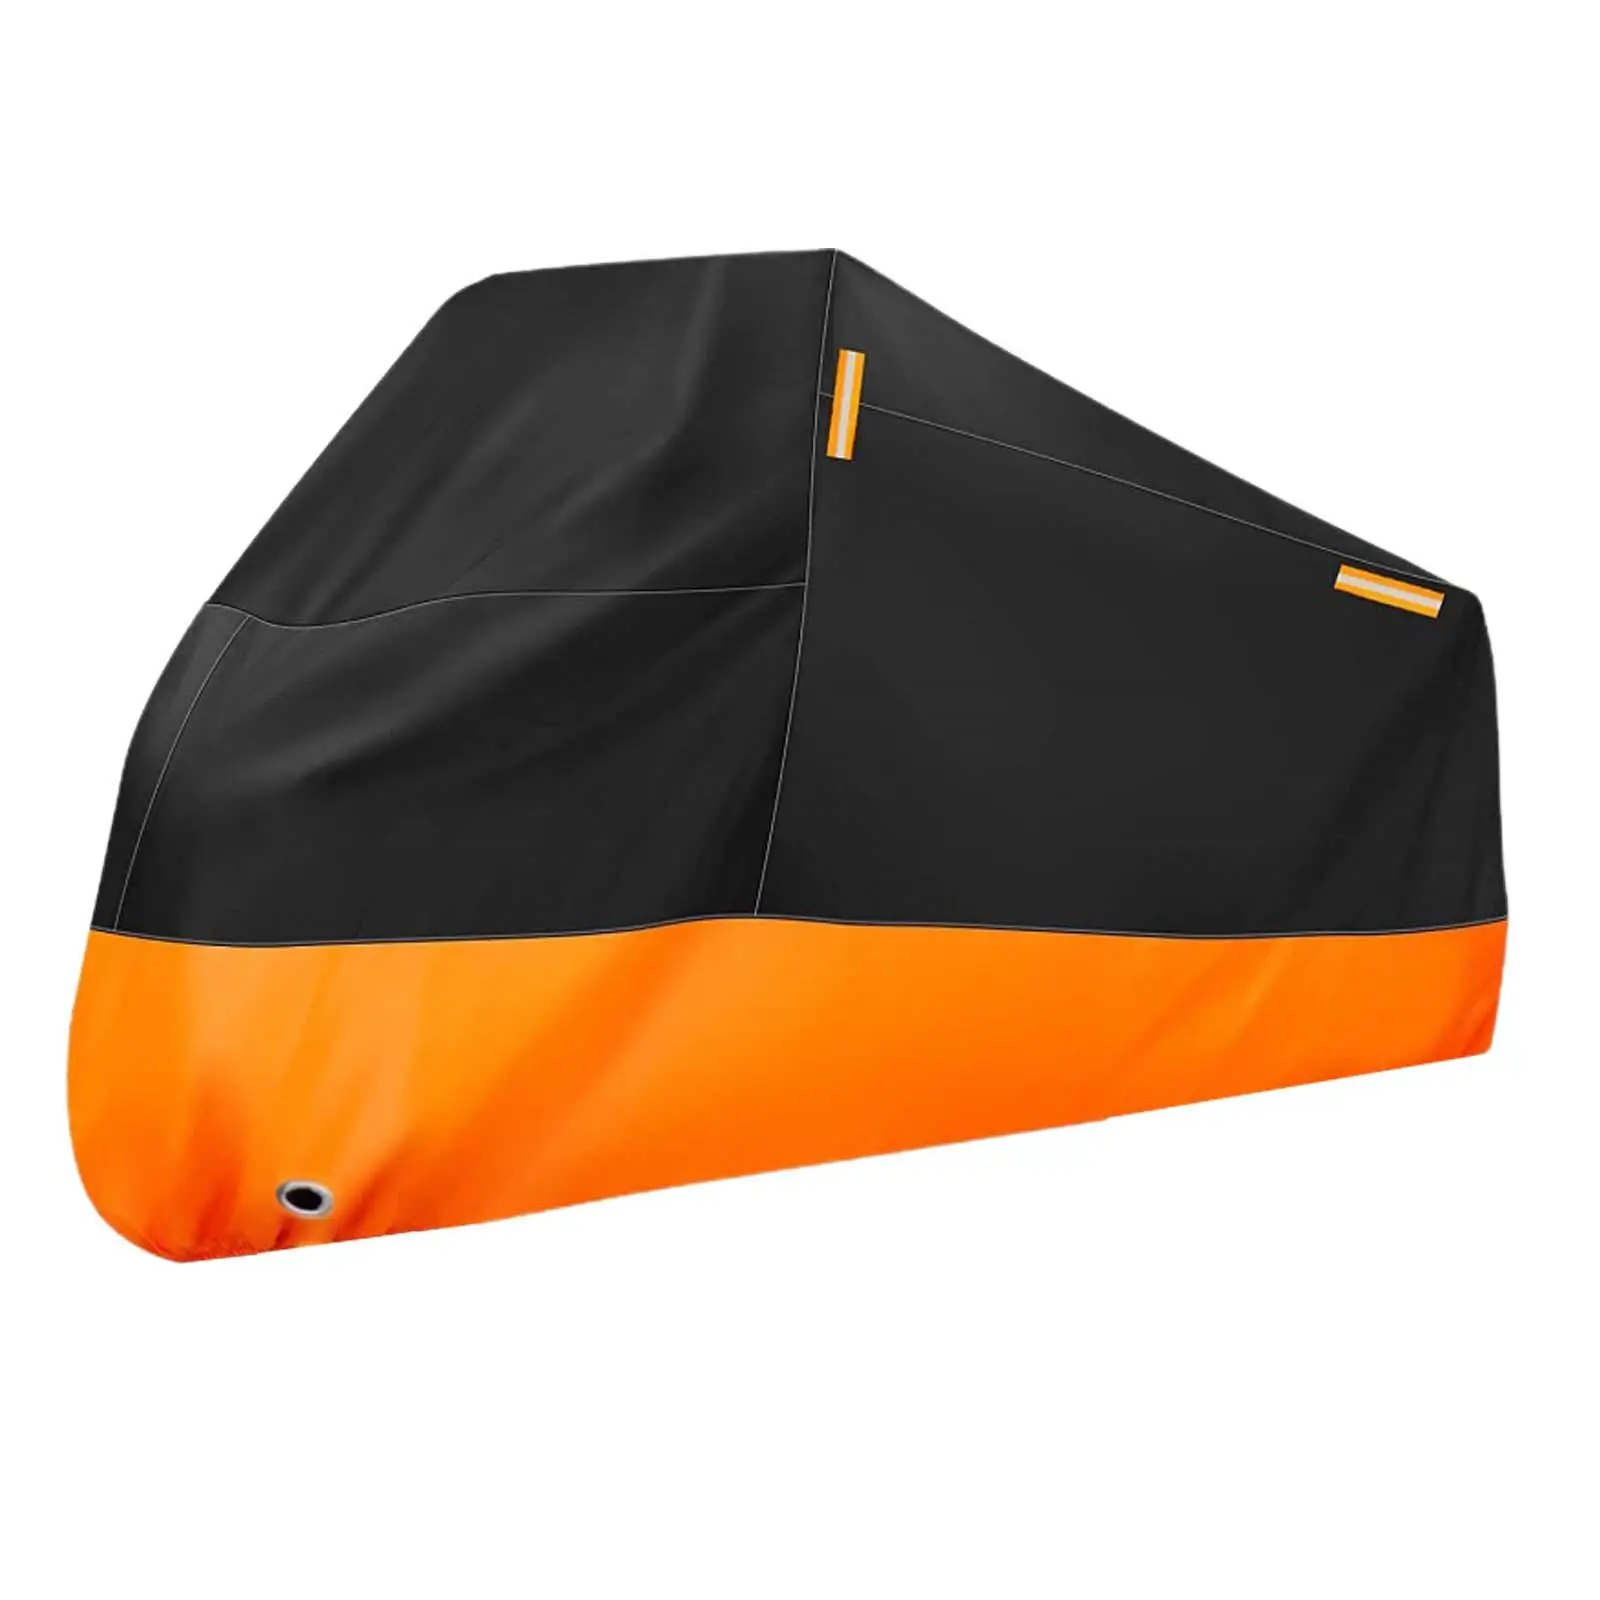 Universal Motorcycle Cover Durable Dustproof Tear Resistant Protective Cover